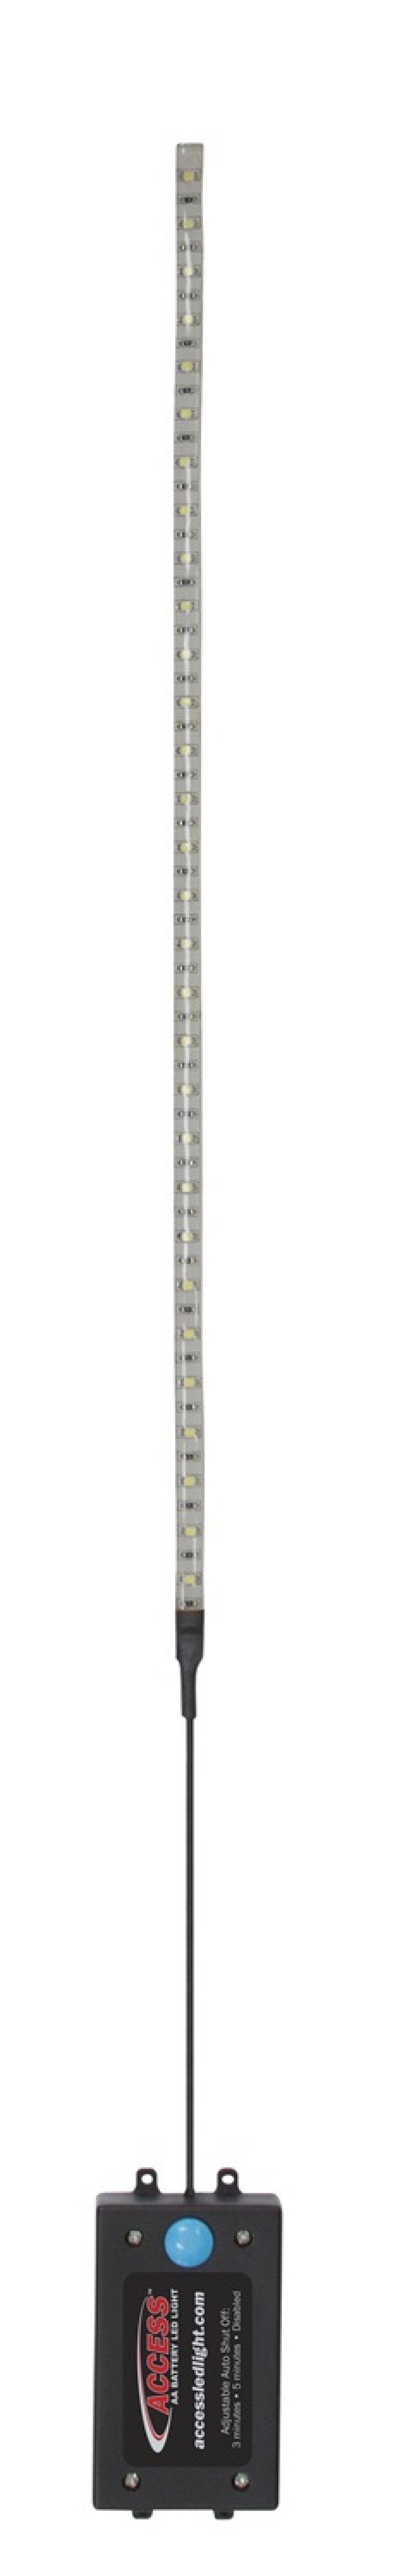 Access Accessories 60in LED Strip Light - 1 Single Pack 80170 Main Image